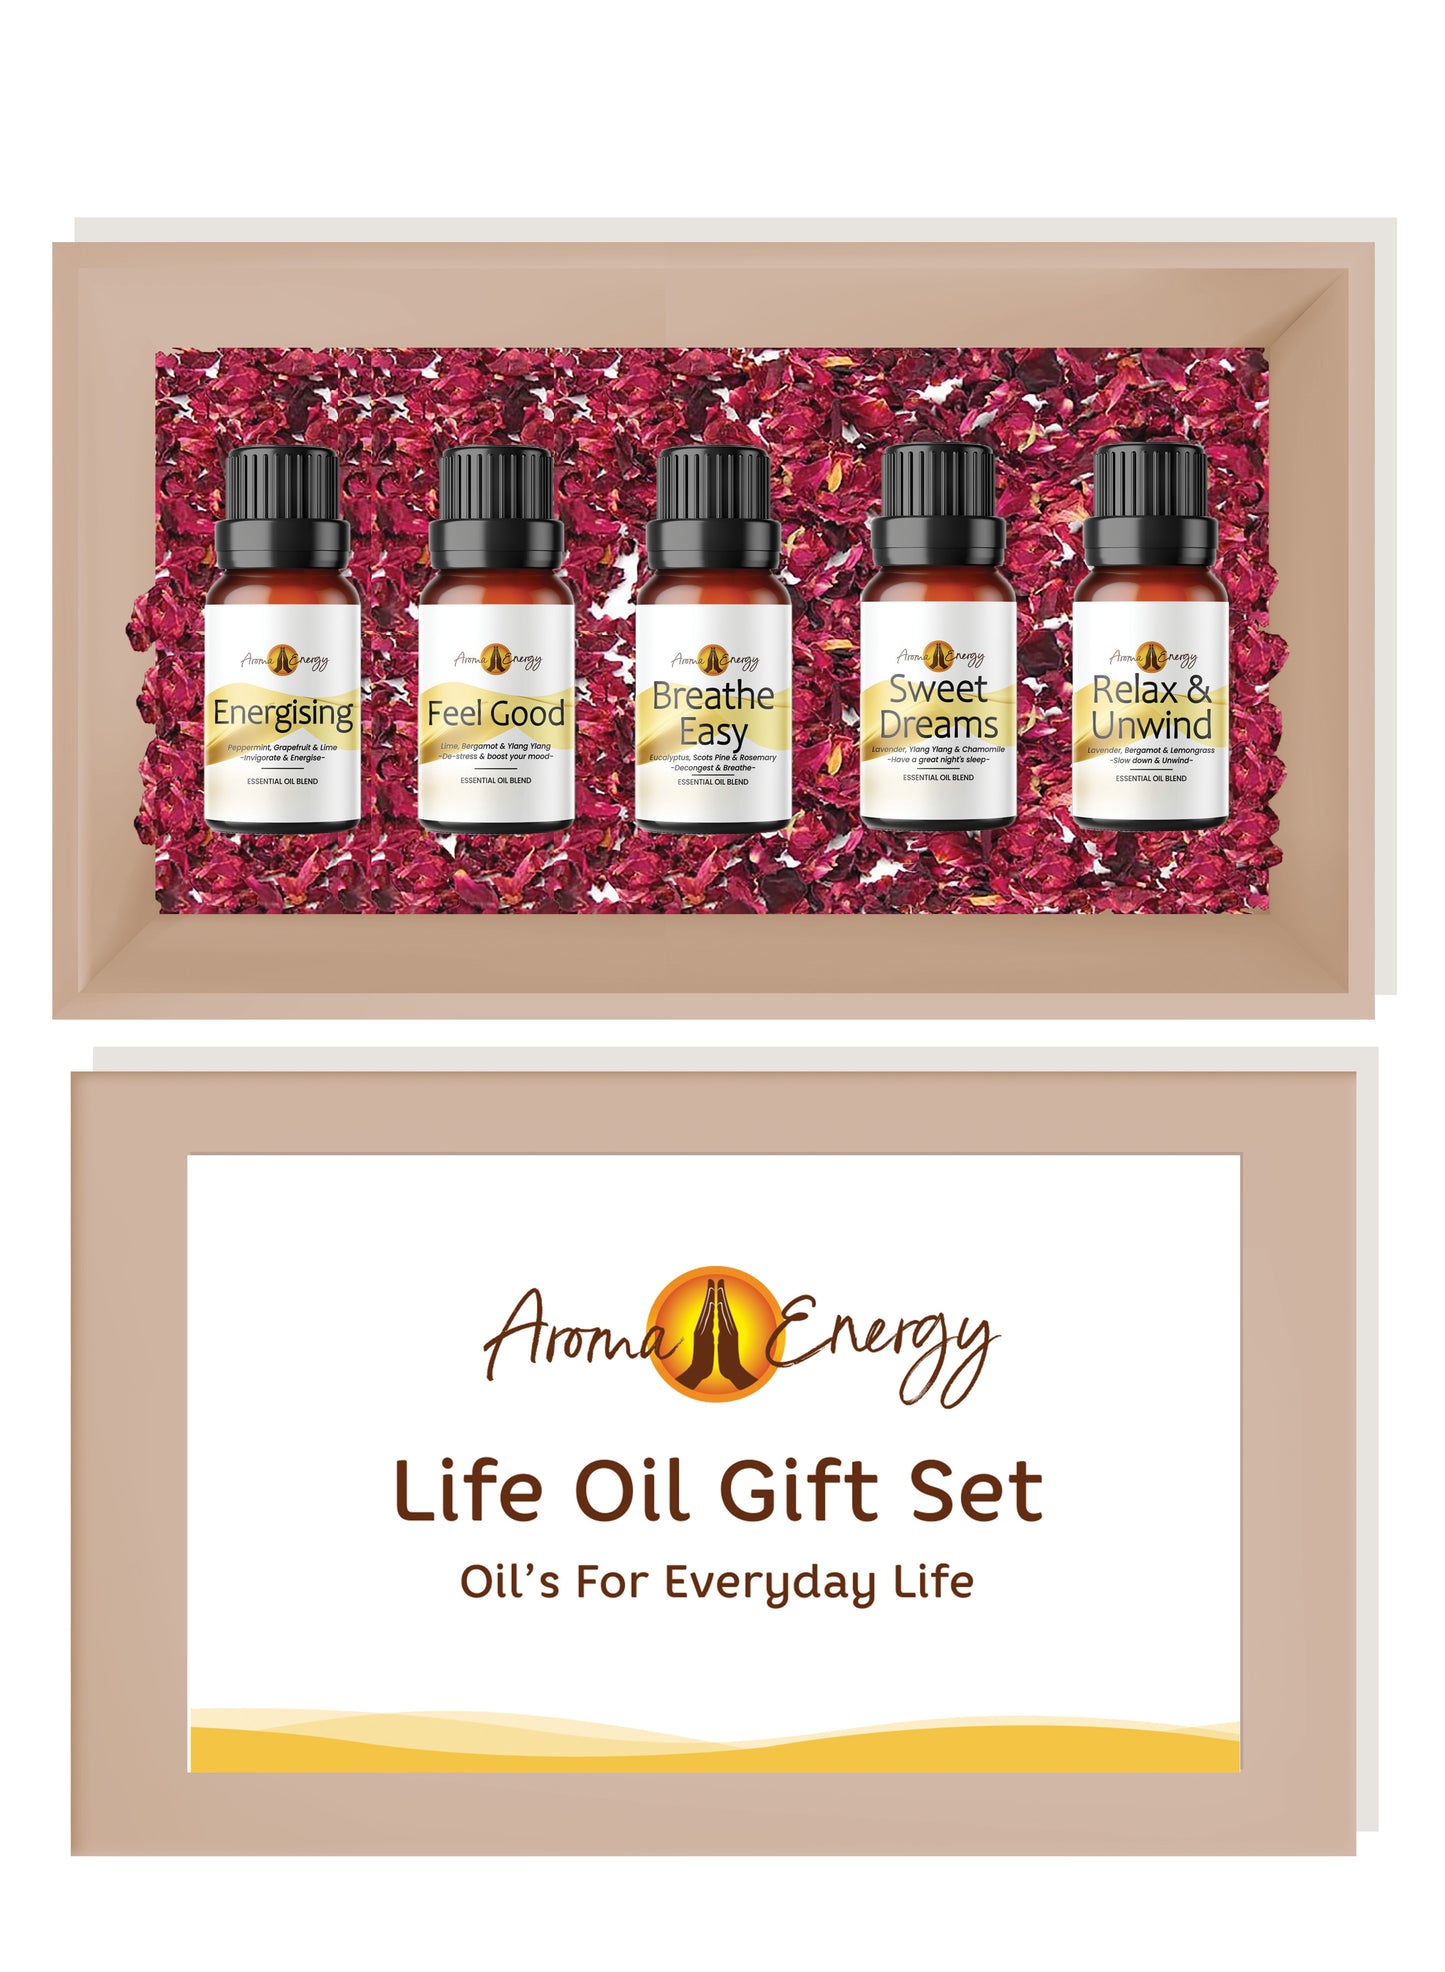 Life Pack - Essential Oil Gift Set - Aroma Energy